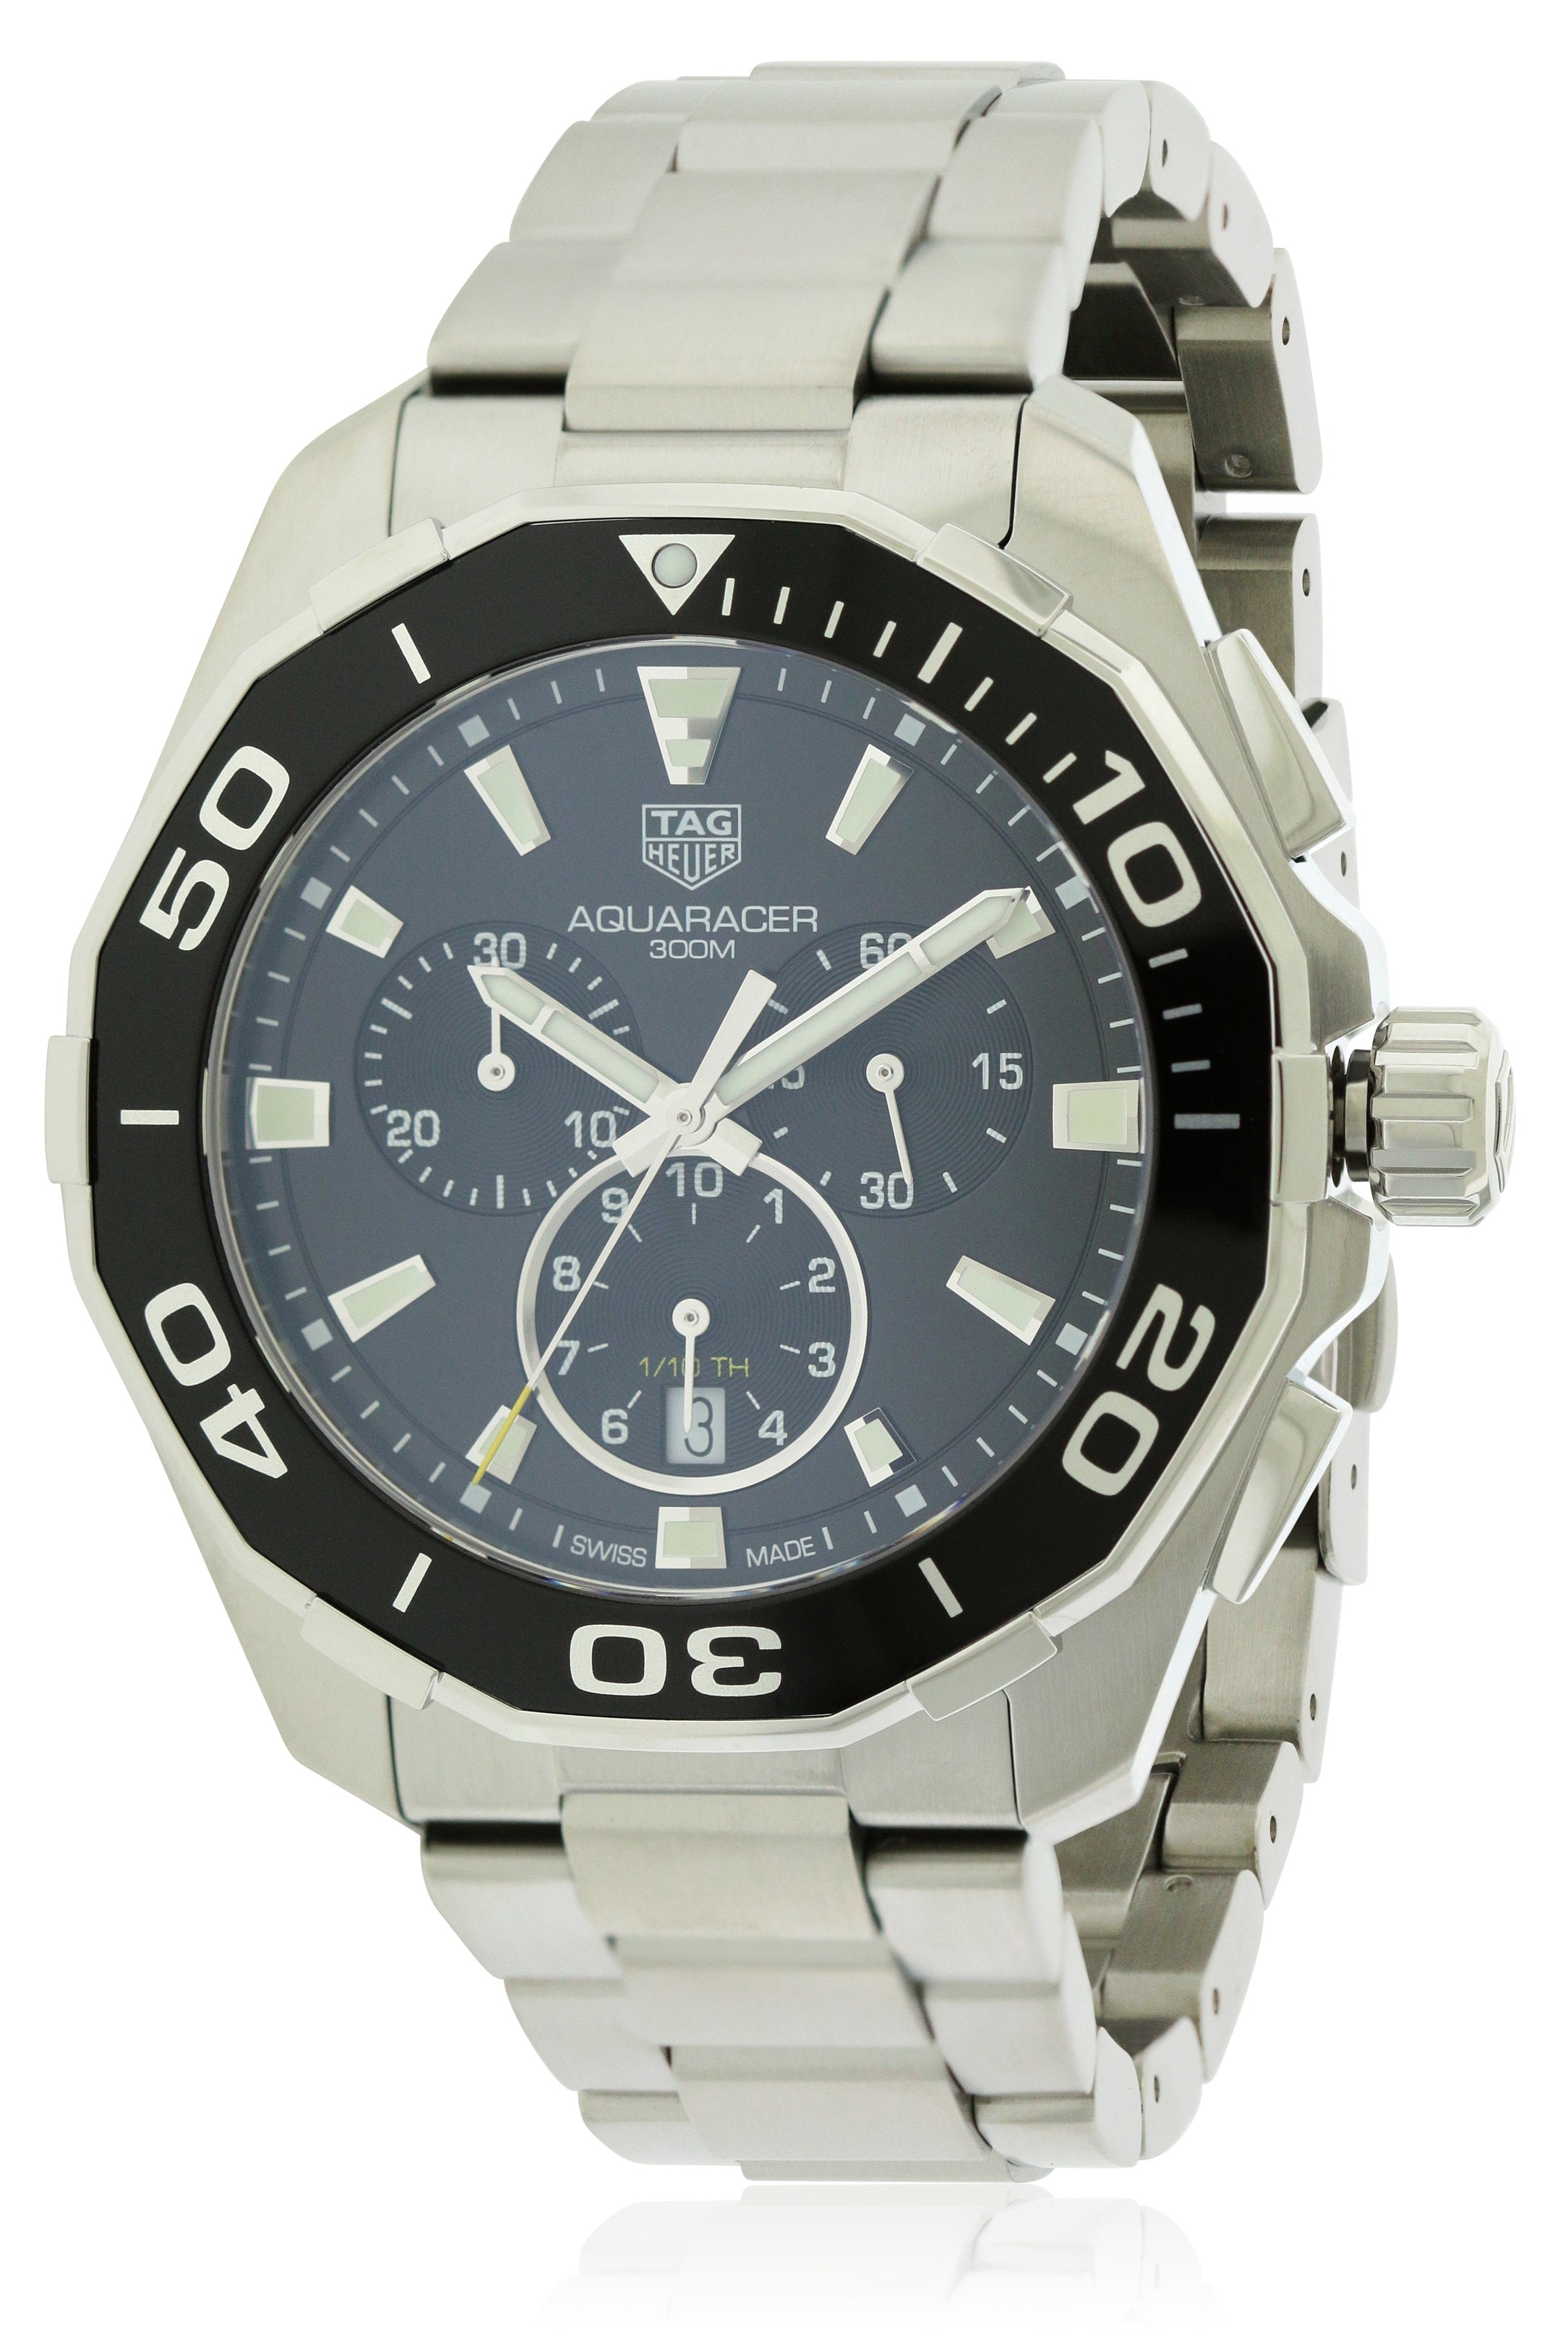 Tag Heuer Aquaracer Chronograph Stainless Steel Mens Watch